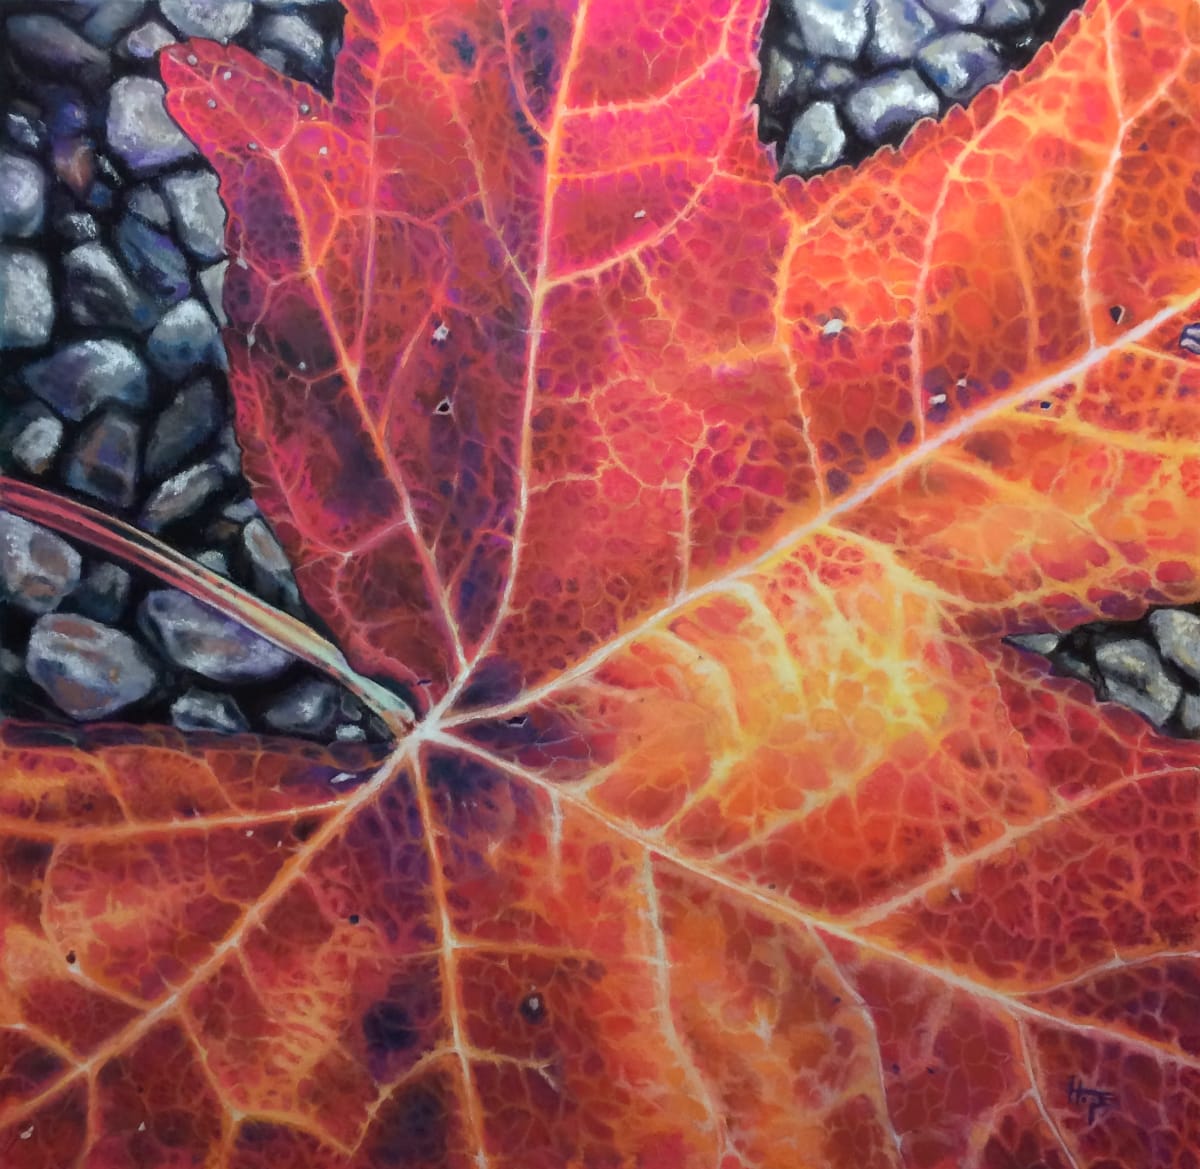 Autumn Repose II: On the Path by Hope Martin 